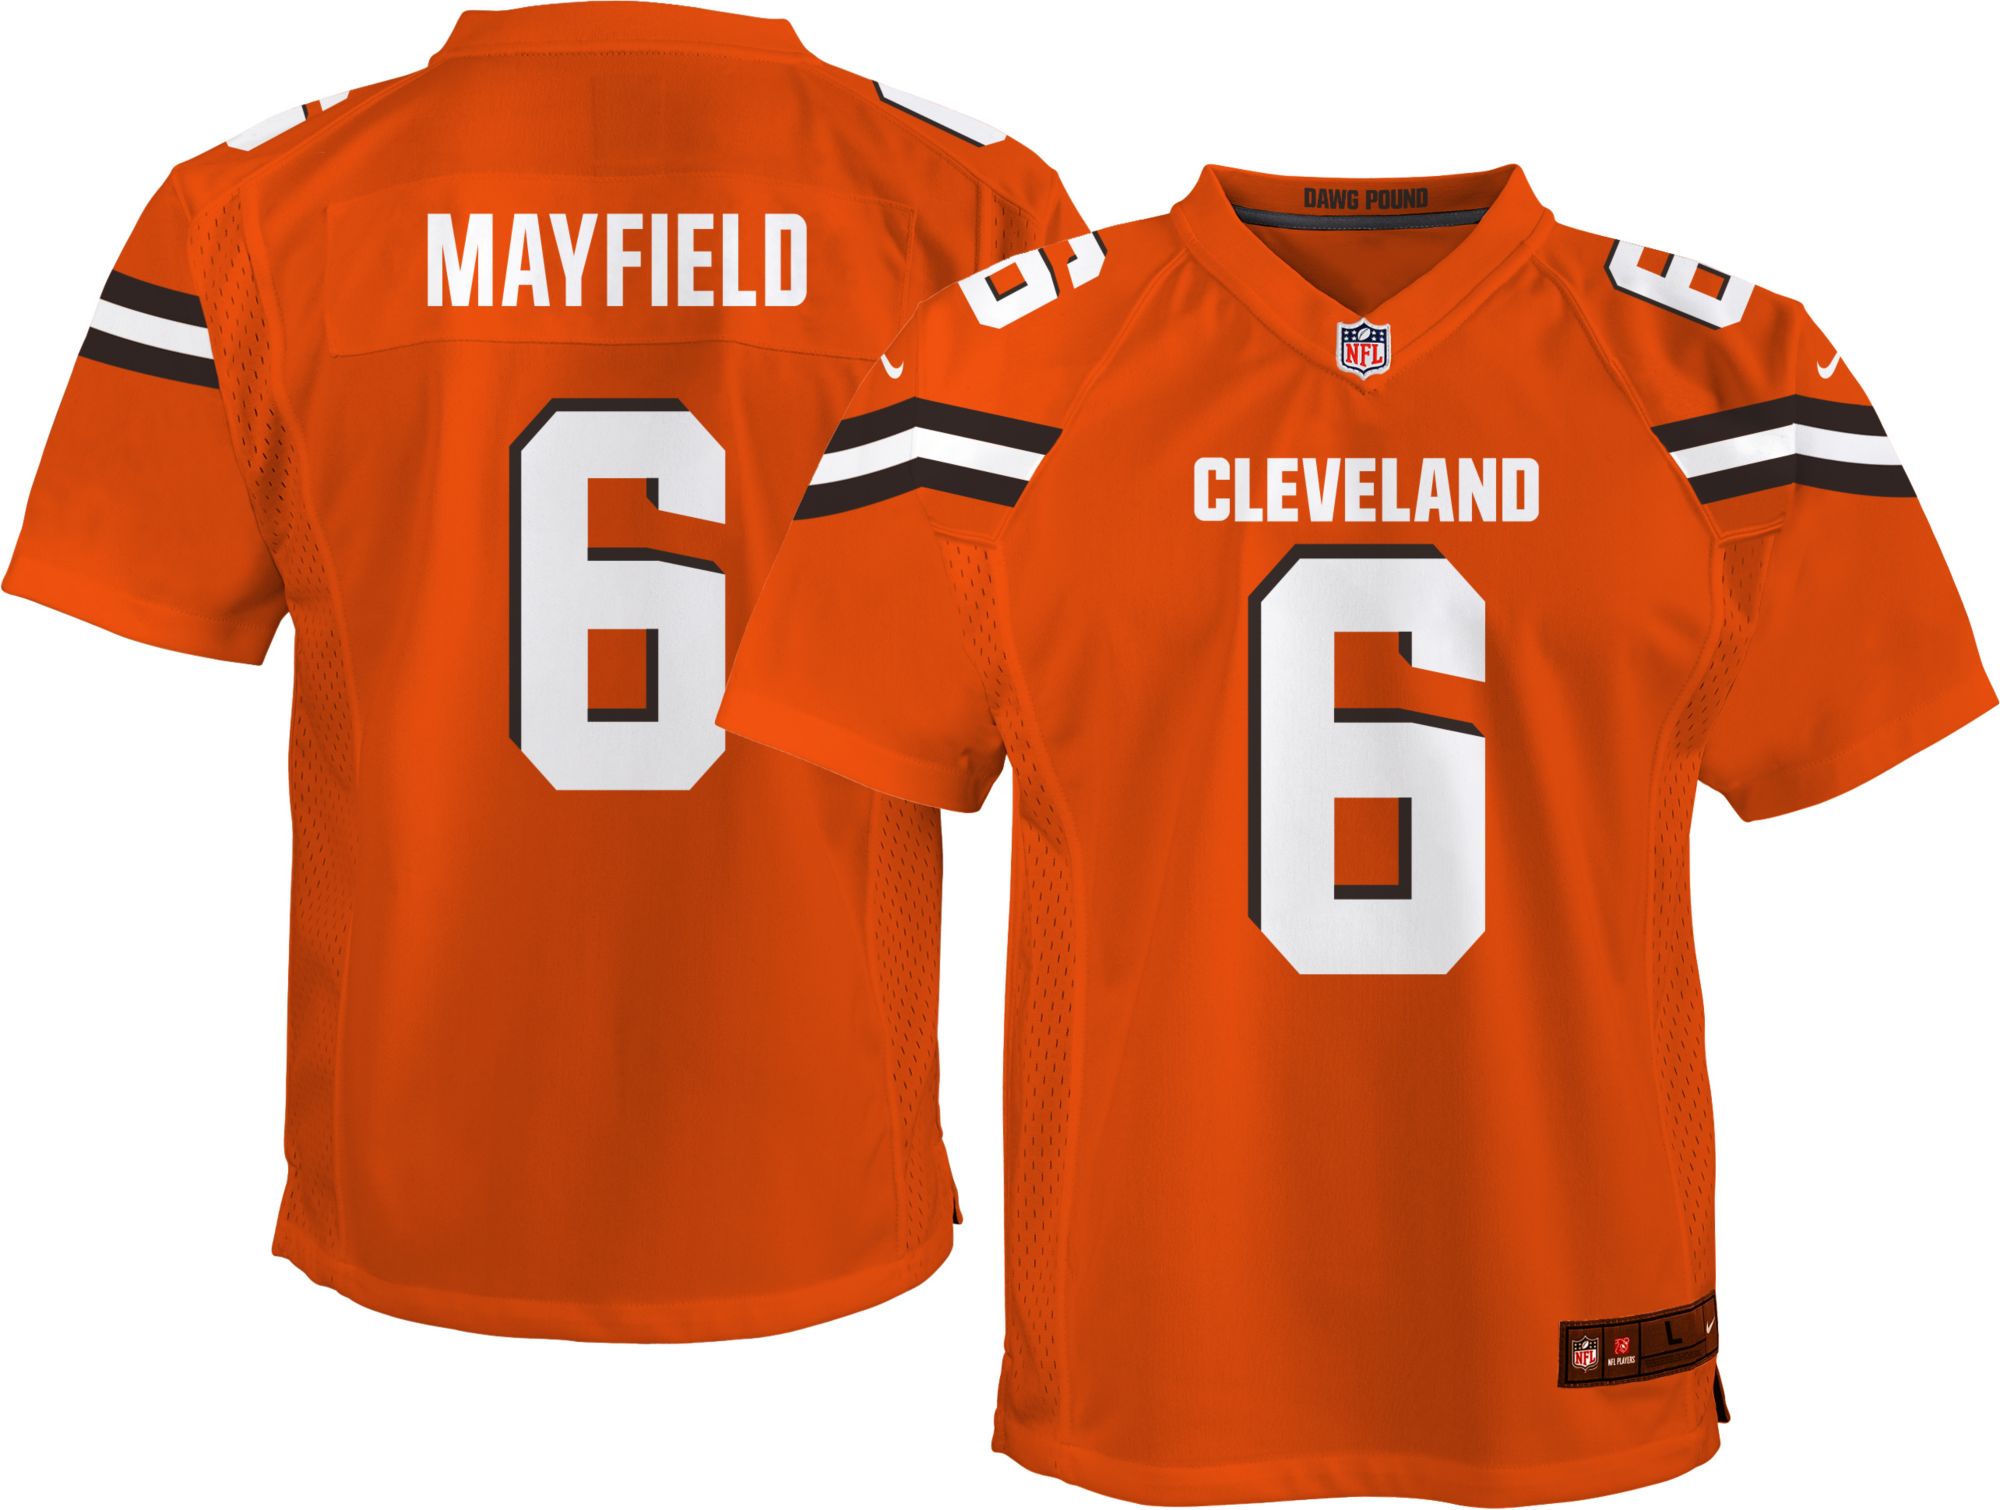 youth mayfield jersey